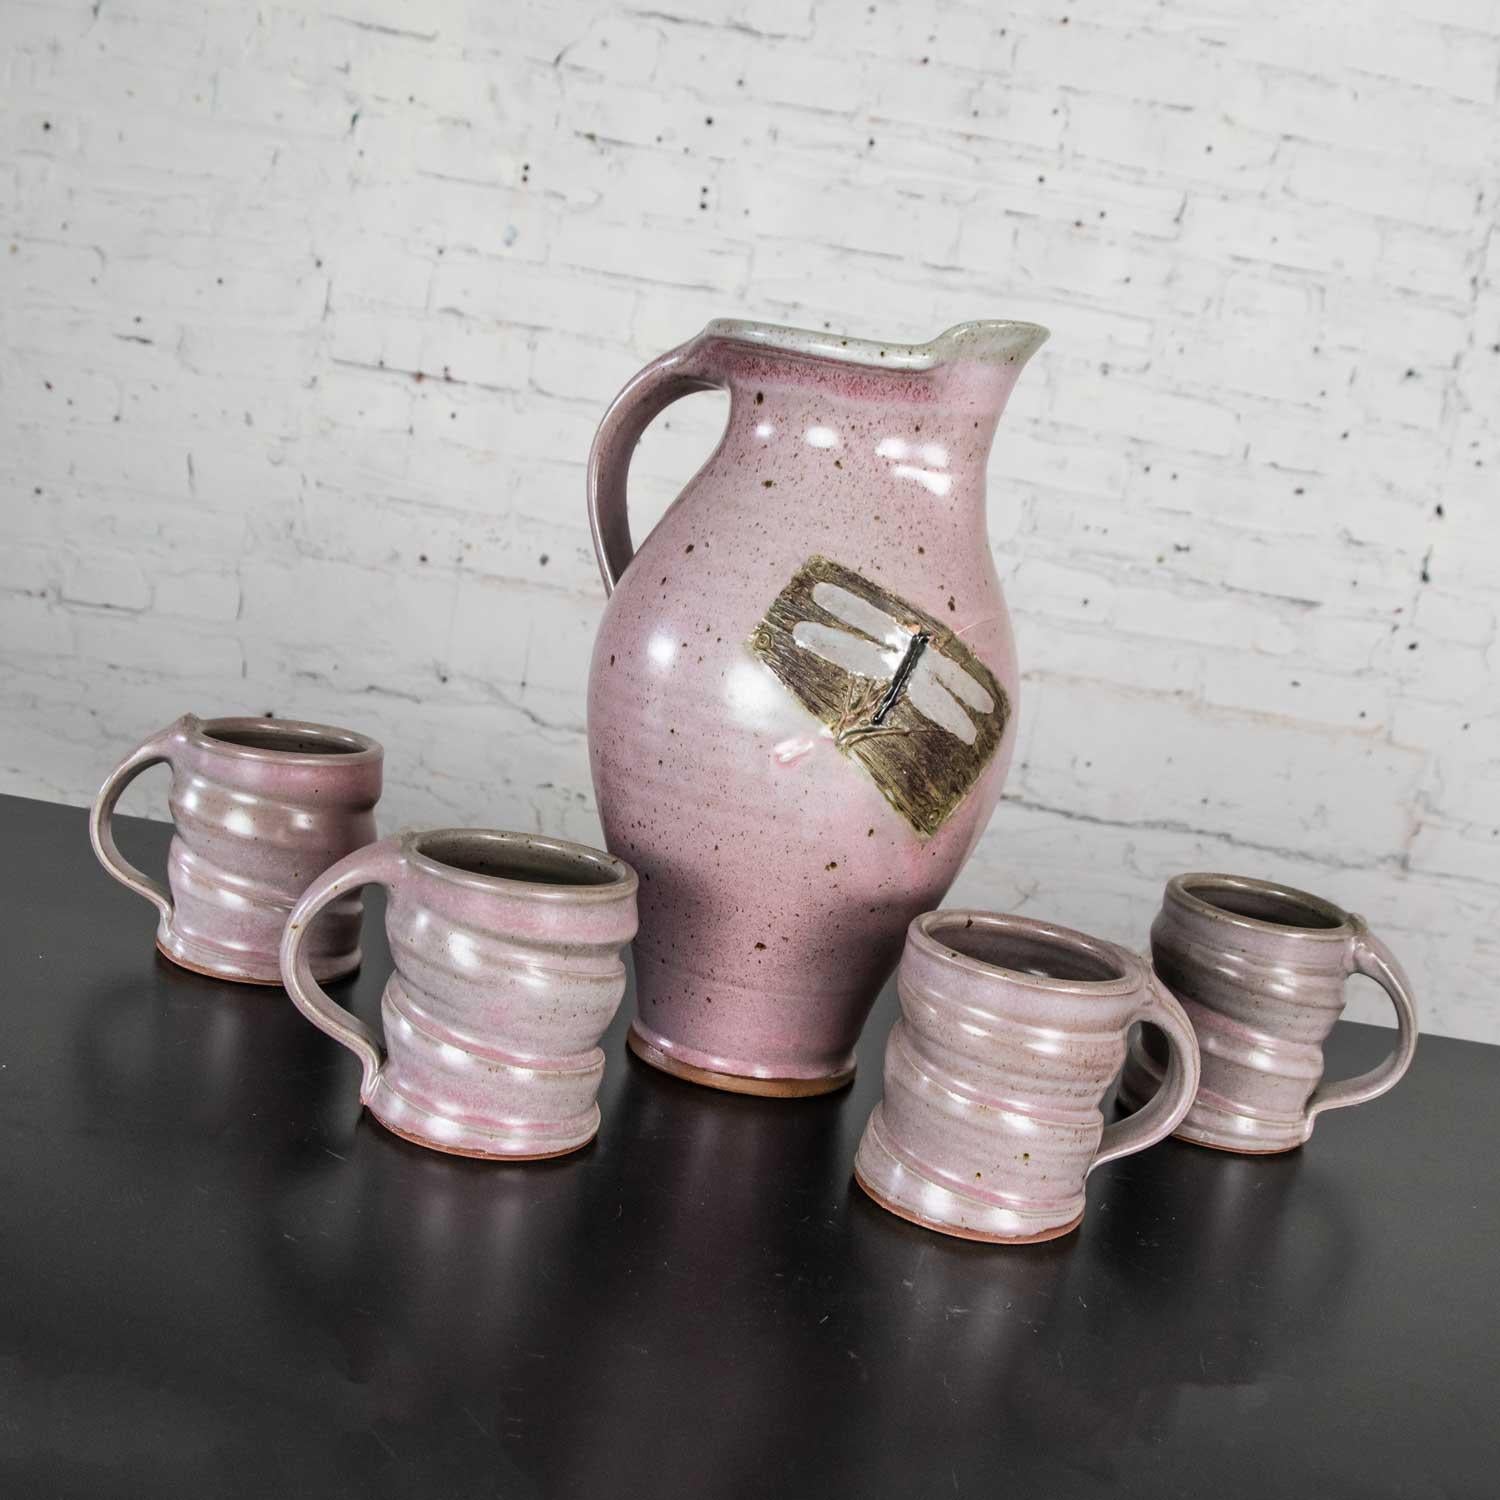 Lovely purple Studio Pottery ceramic handmade hot chocolate set includes one pitcher and four cups. Beautiful age-appropriate condition with no chips, cracks, or chiggers that we have seen. Please see photos, circa 2001.

Note: Shipping is